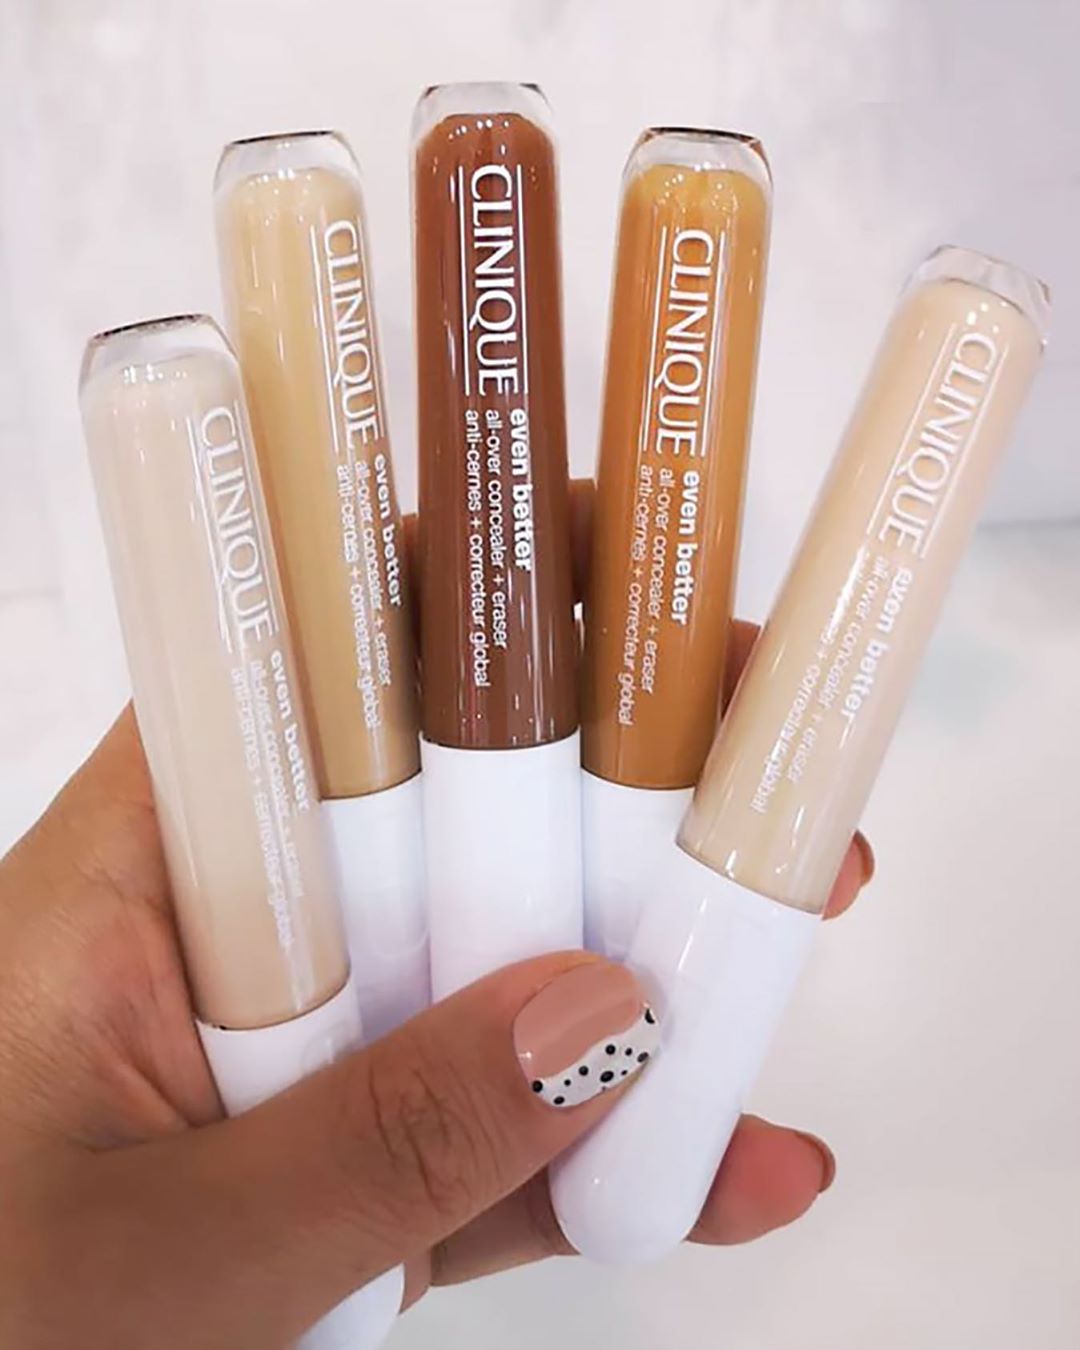 Clinique - Dark spots? Dark circles? Our NEW Even Better All-Over Concealer + Eraser makes it all disappear ✨ Visit @sephora October 2nd - 3rd to learn all about the newest member of the #EvenBetter f...